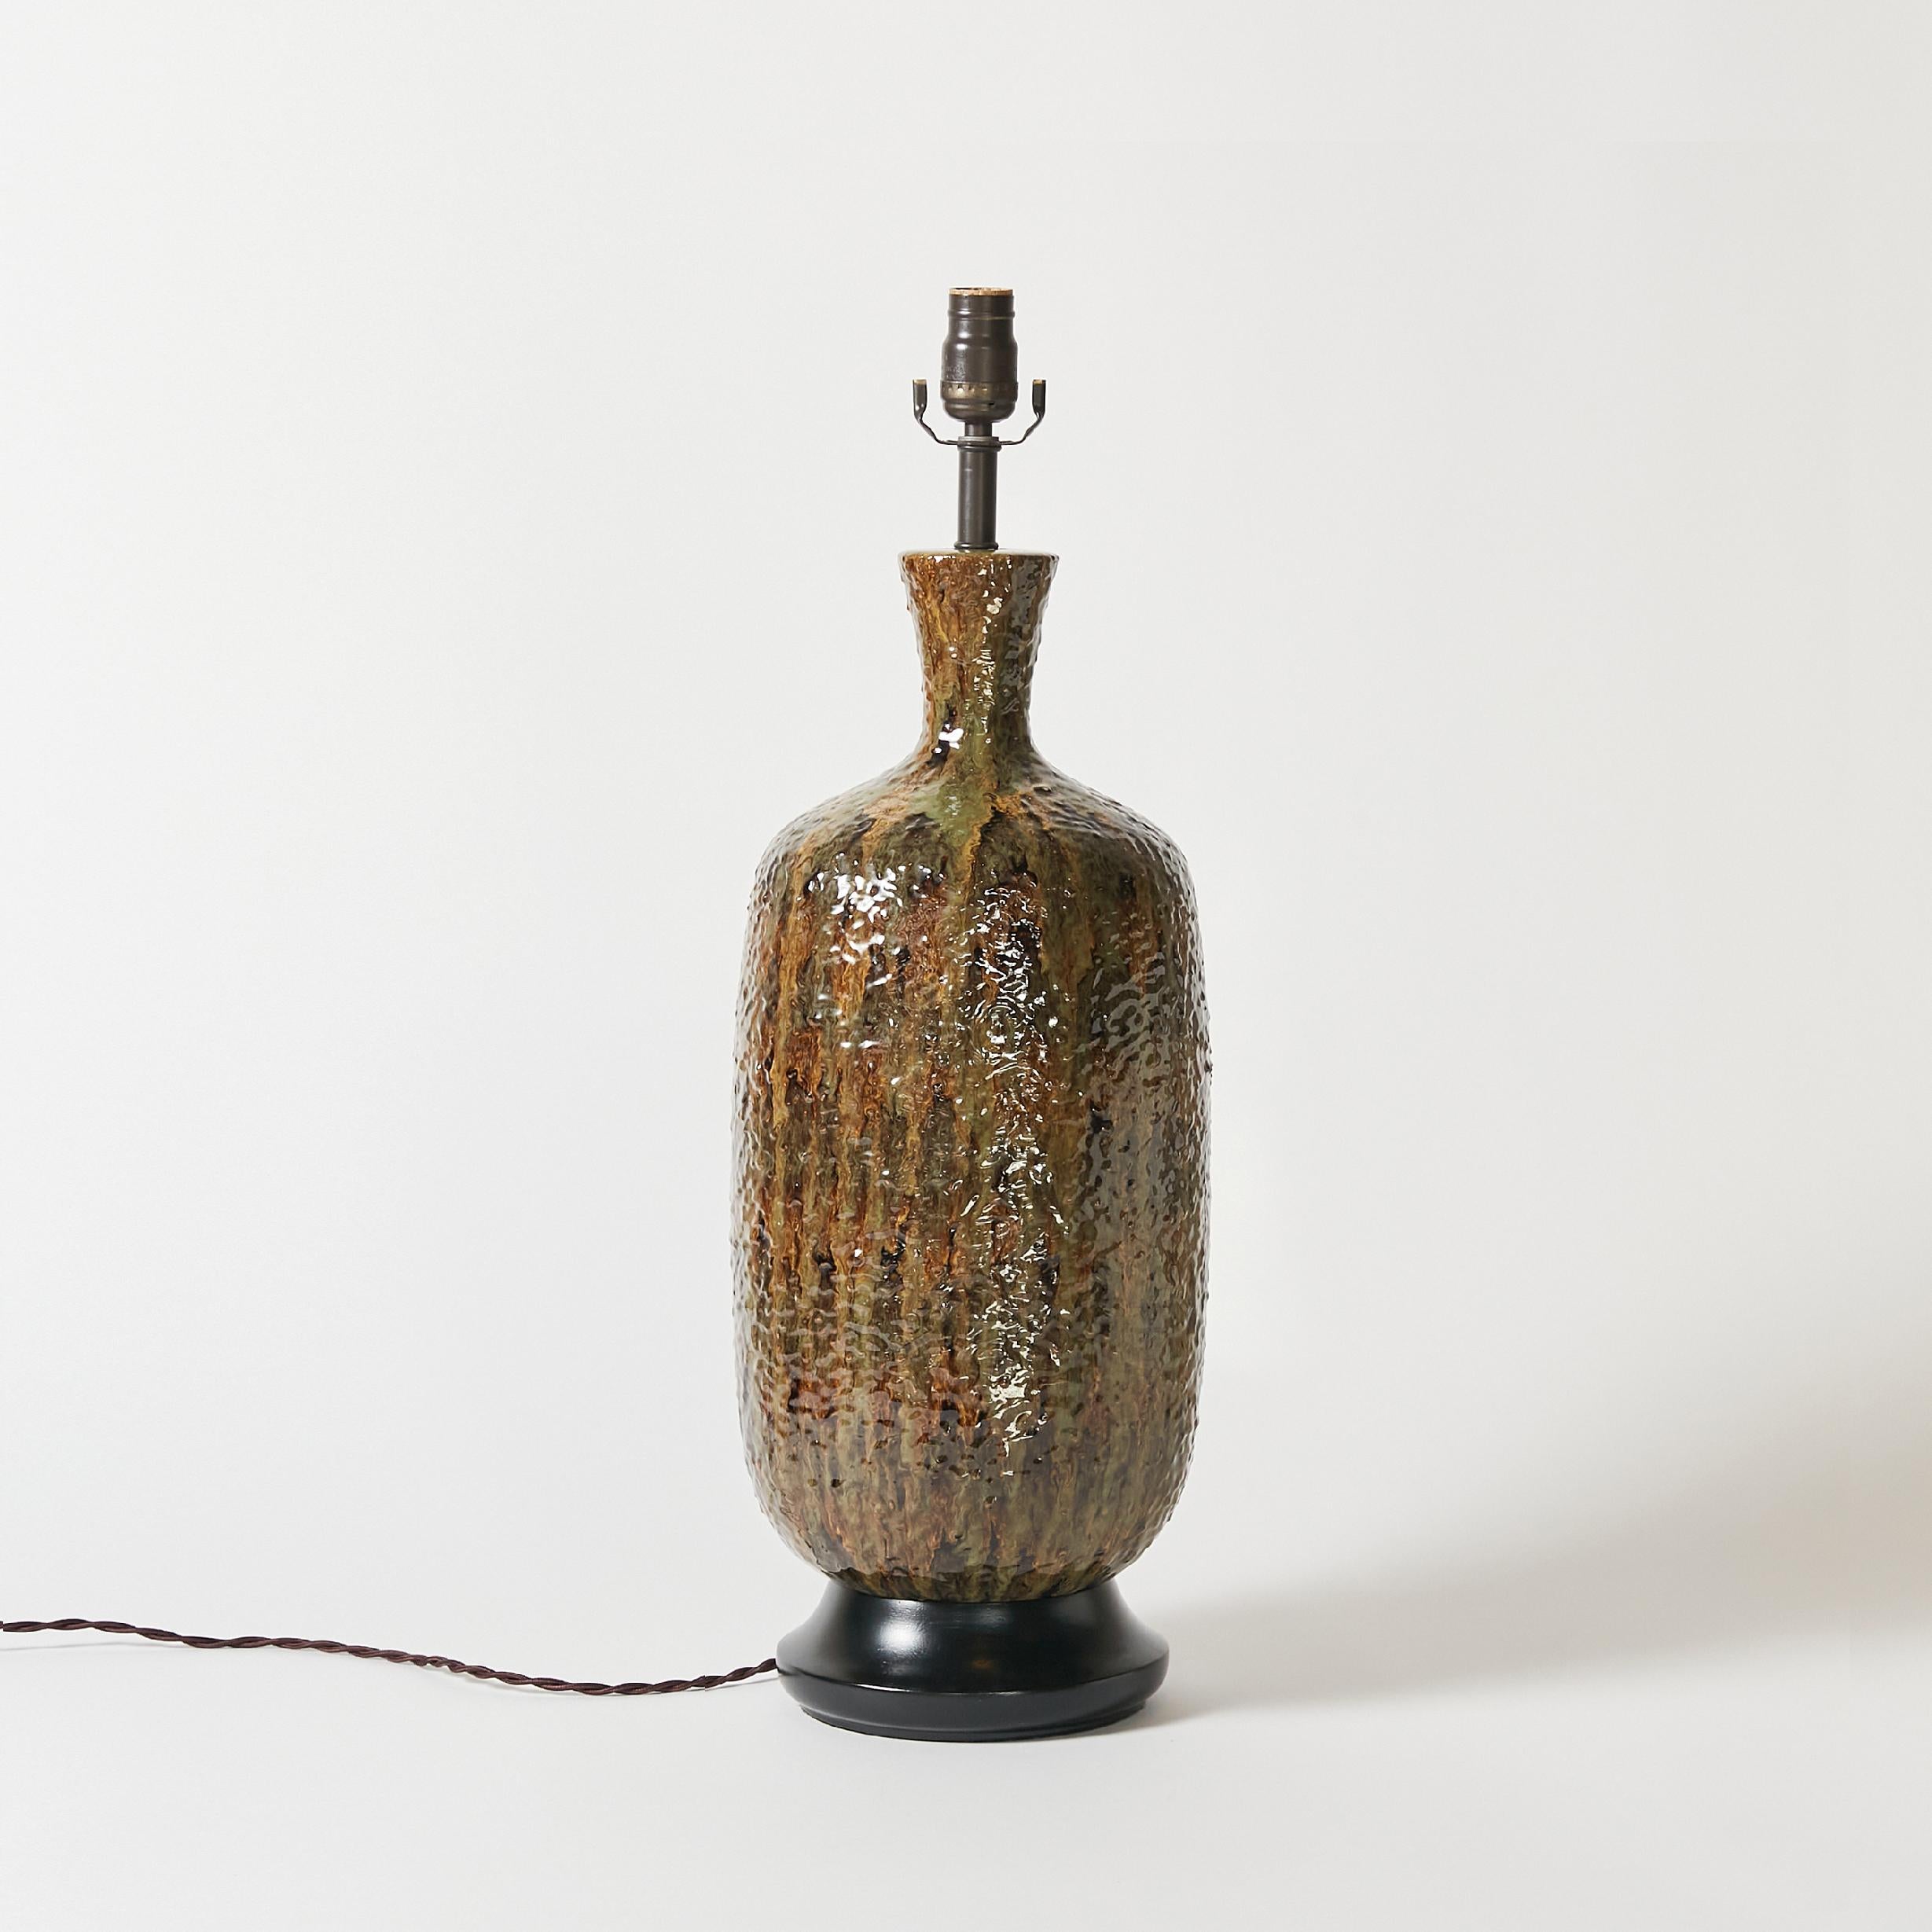 Mid century ceramic table lamp with textured glaze finish in different shades of dry green.
This item has been rewired with new hardware and braided cloth cord. This lamp does not include shade or harp.